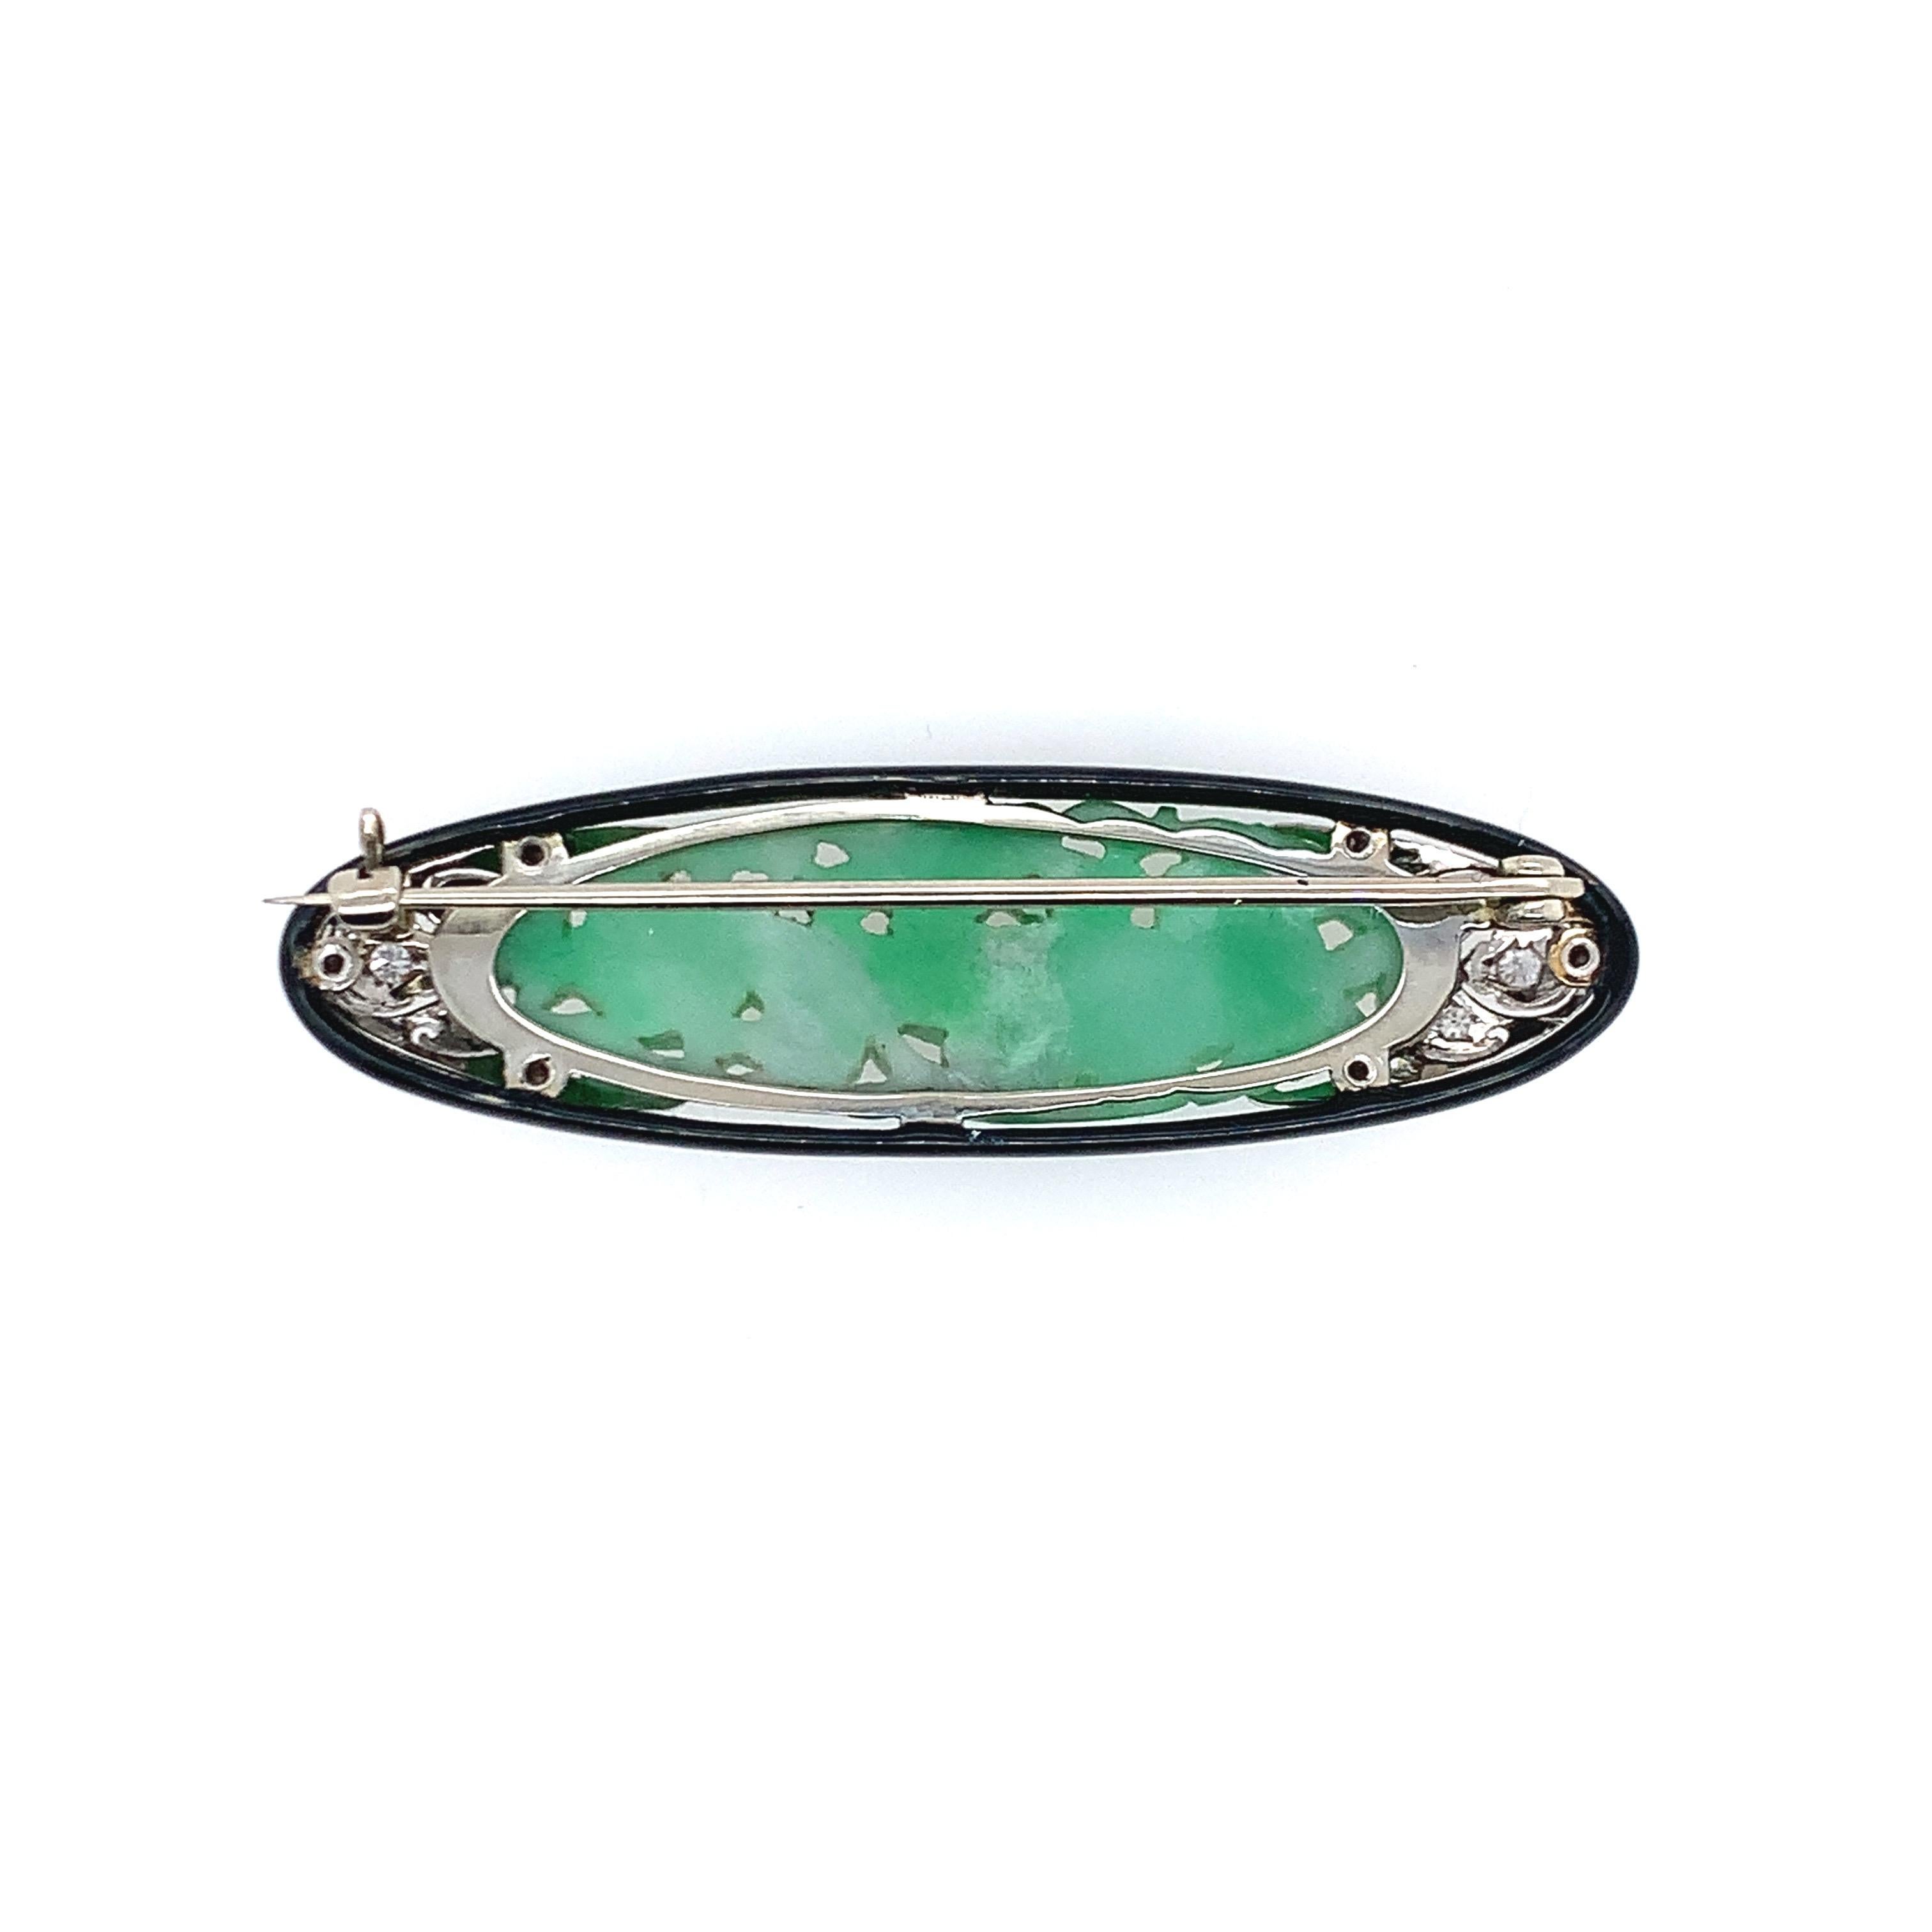 With a nice black enamel trim, this art deco brooch is set in platinum and consists of 0.20 carat diamonds as well as natural, type A jade at the center. The length is 0.63 inch and the width is 2.13 inches. The total weight is 10.2 grams.